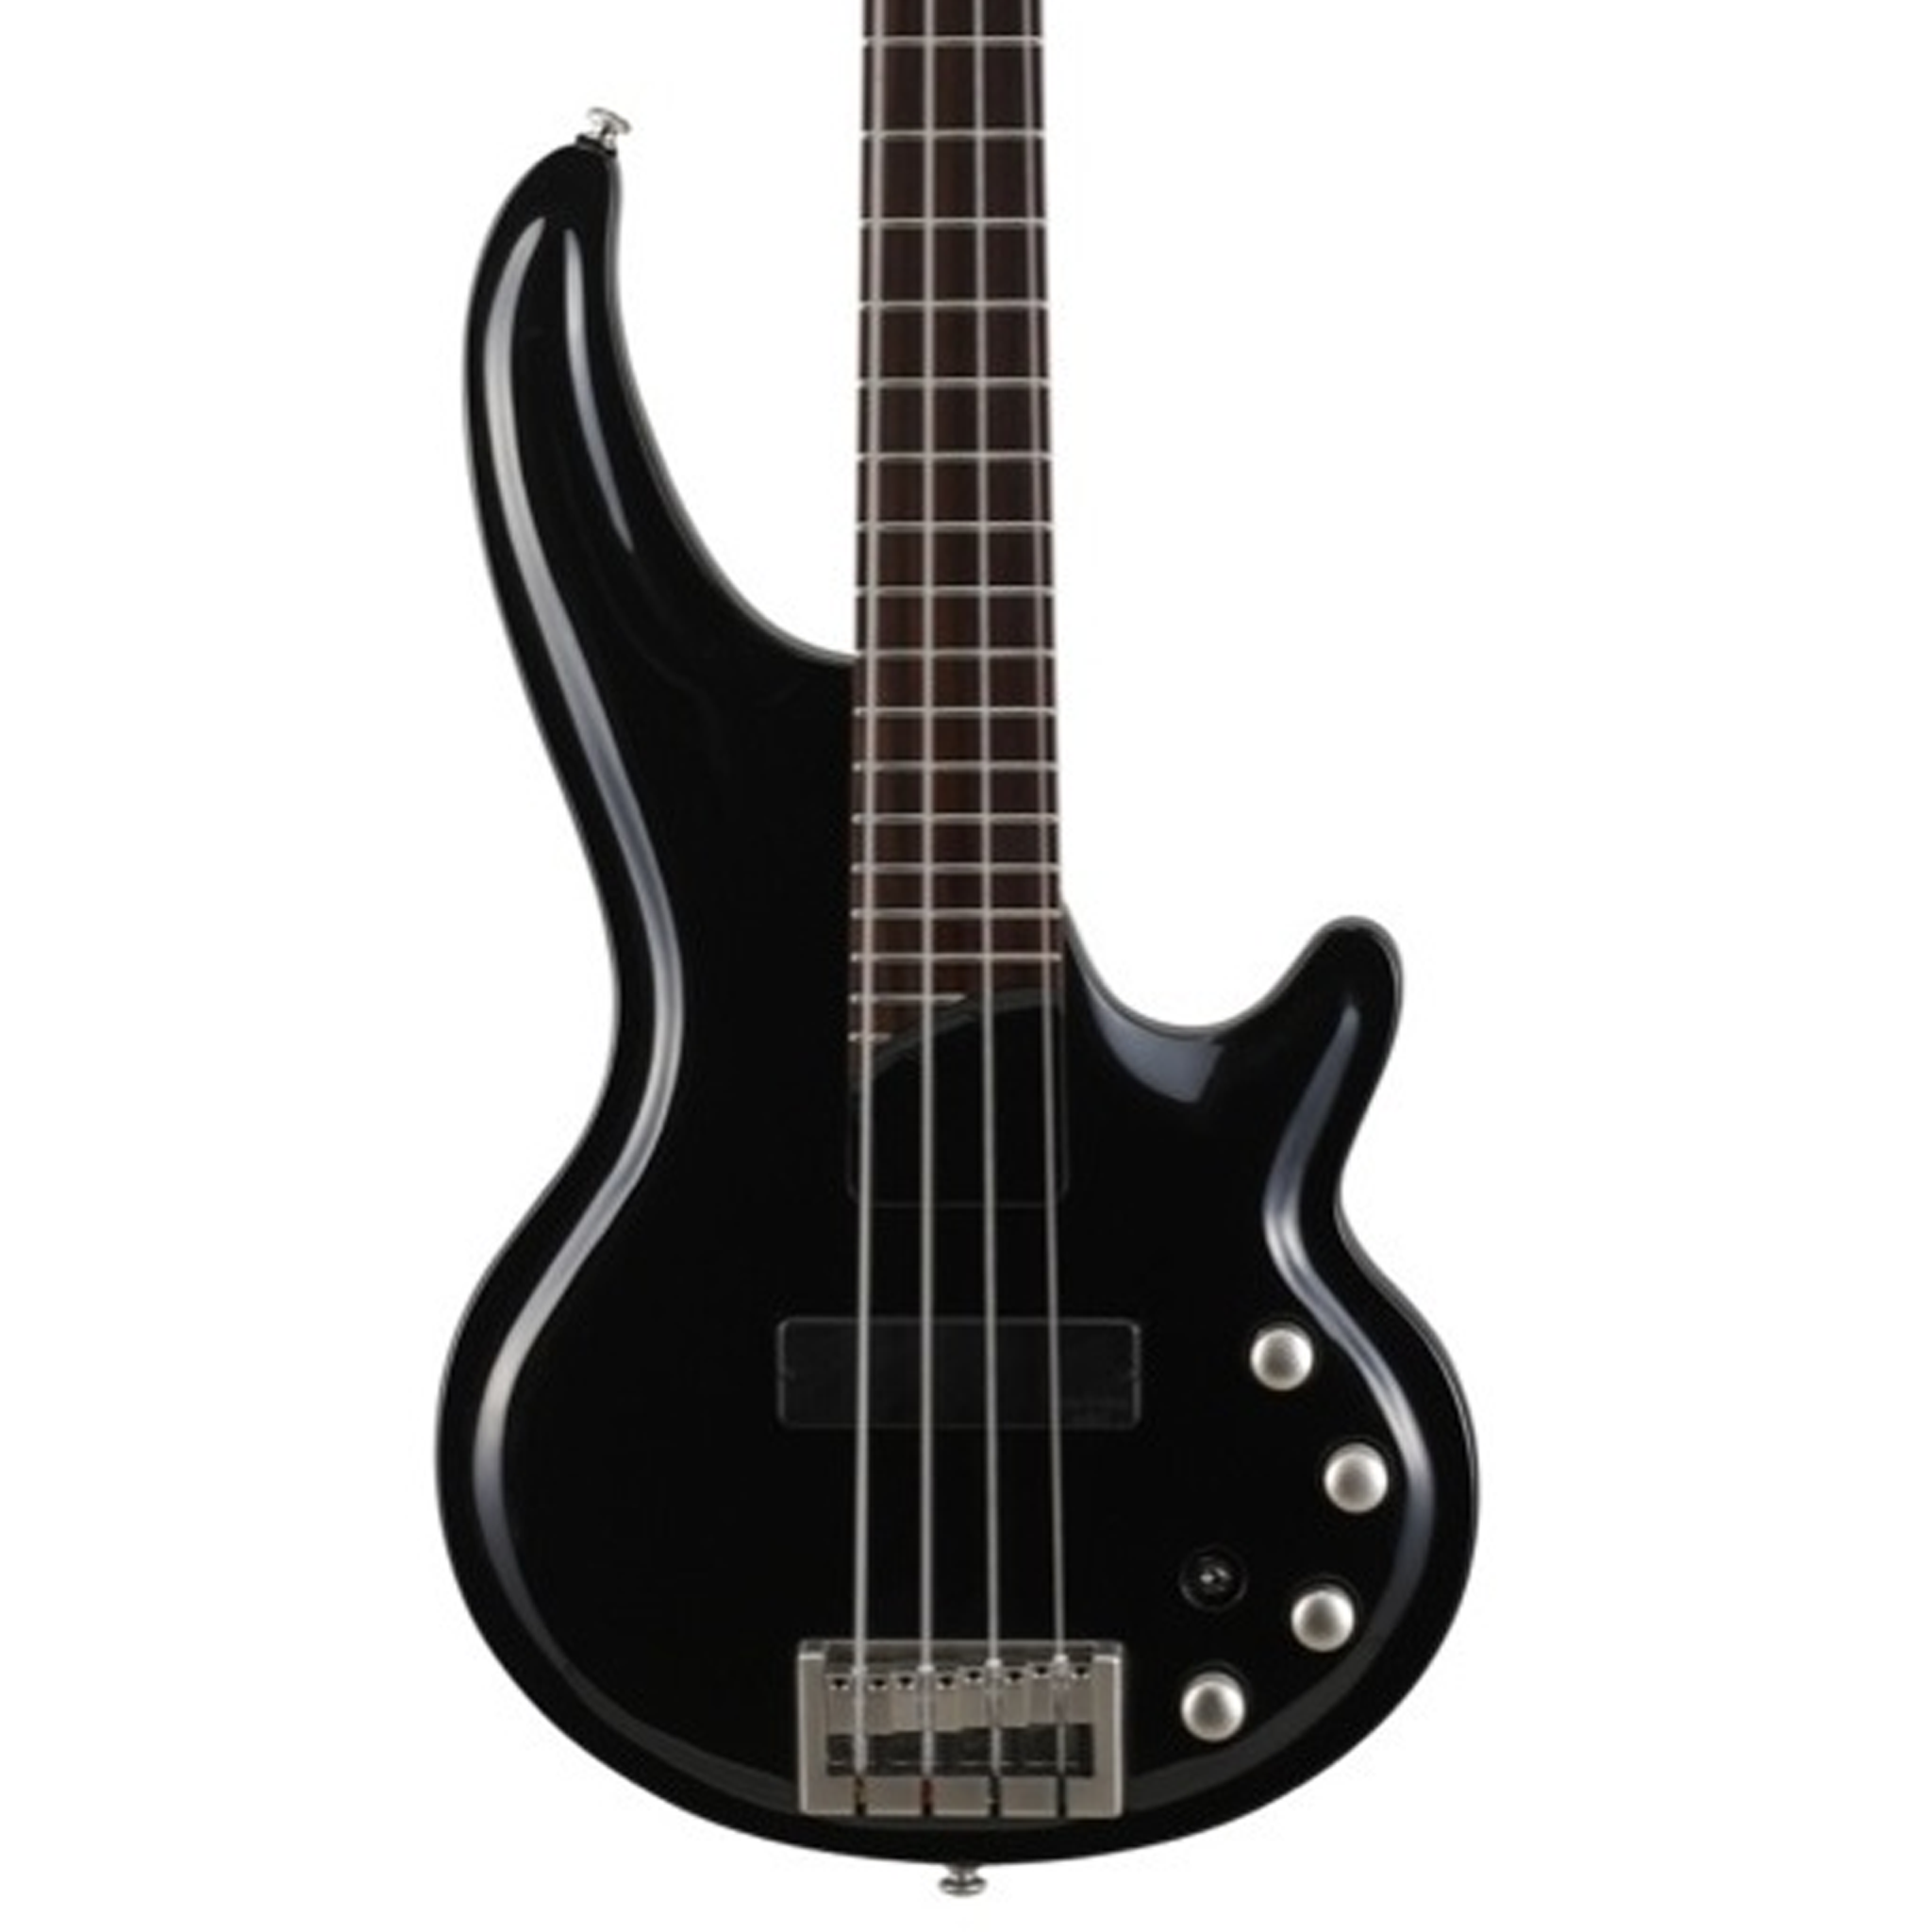 Cort Curbow 4 Active Bass Guitar With Bag (Black)